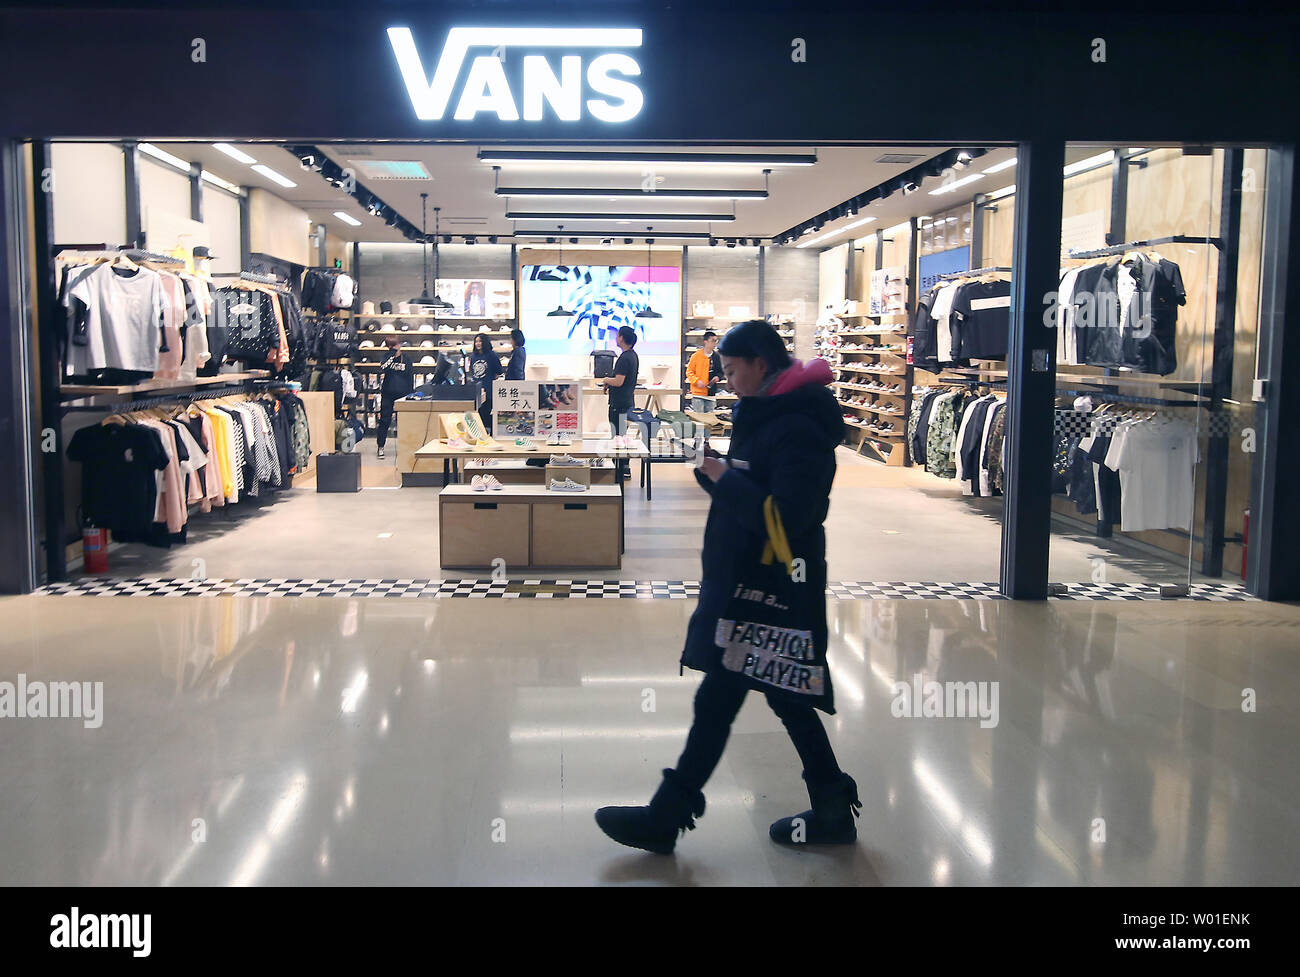 U.S.-based Vans clothing store recently opened an outlet in Beijing on  April 3, 2018. China says ti will respond to any new trade tariffs by the  U.S. with measures of the same